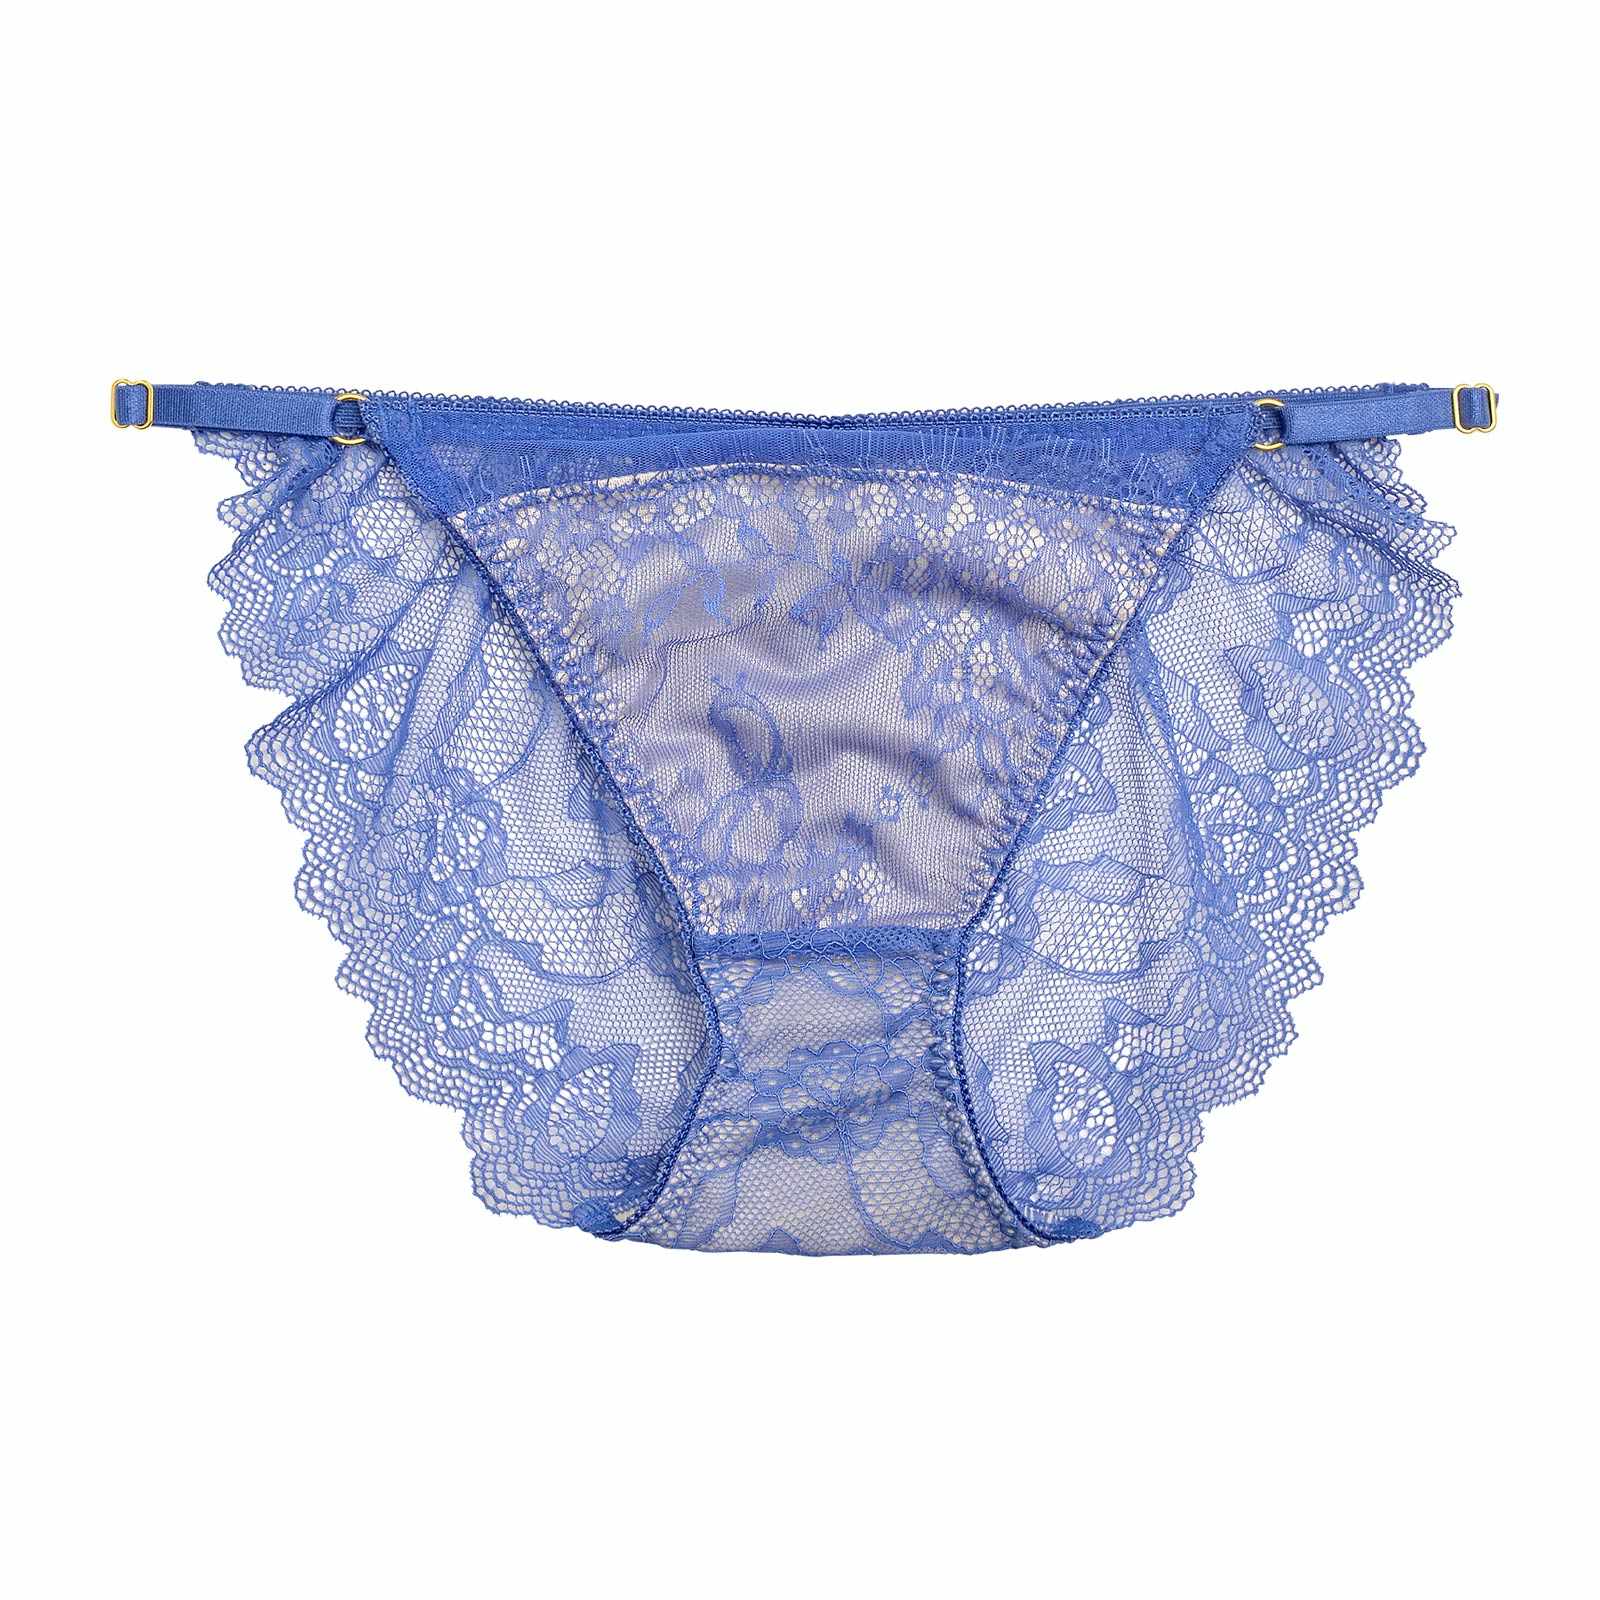 【Re；by Reinest】ZERO BRA series Sheer Lacy Shorts/ シアーレーシィ単品フルバックショーツ